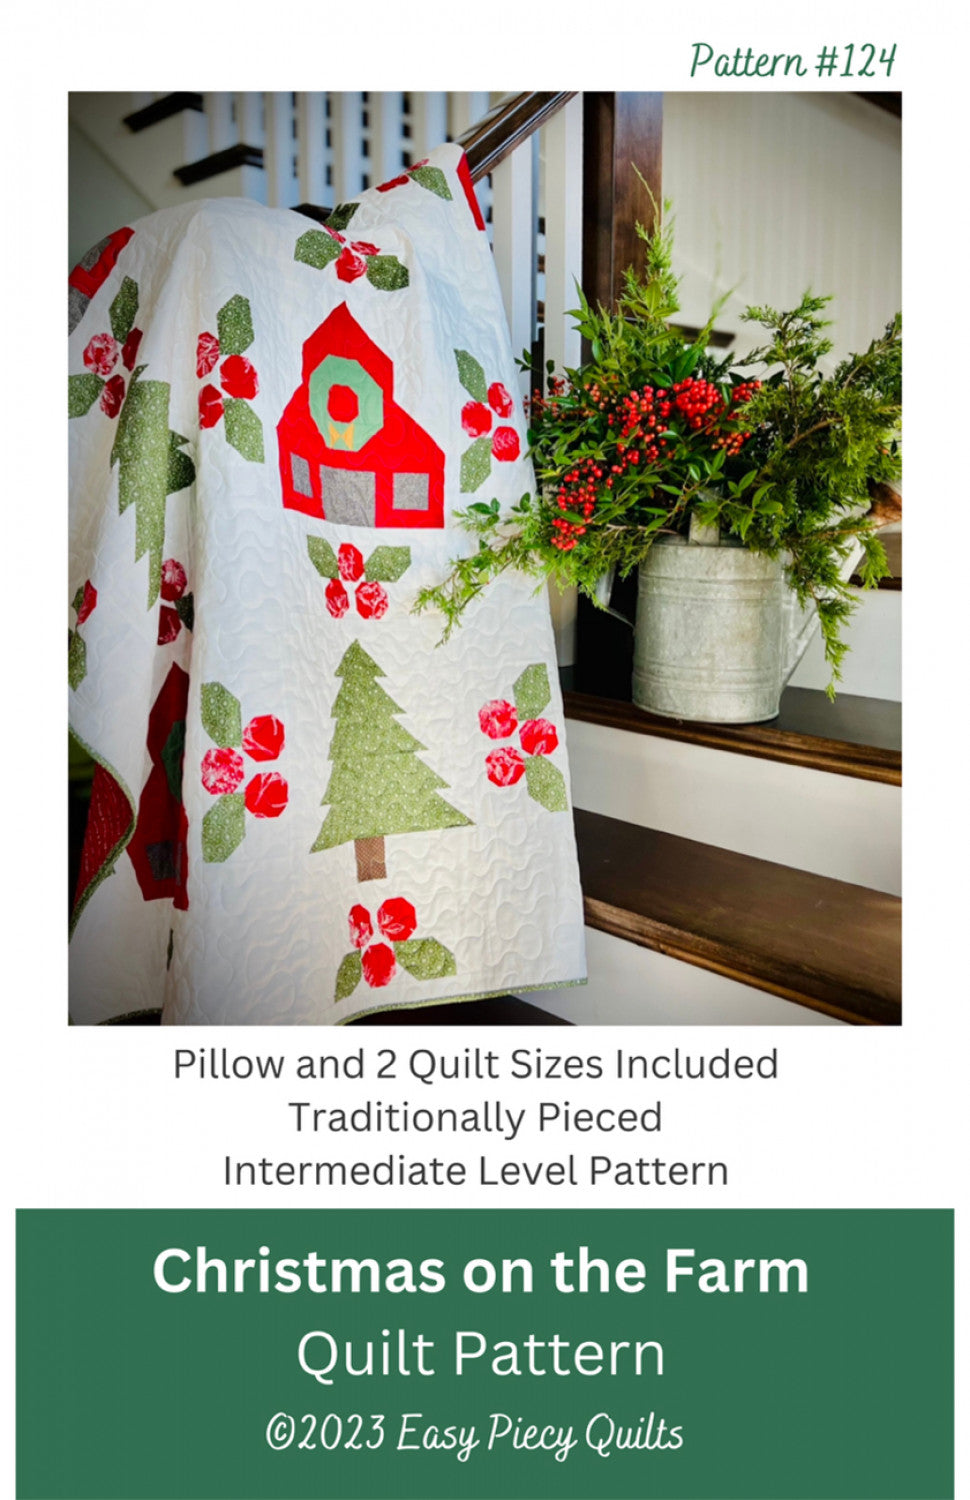 Christmas on the Farm Quilt Pattern by Easy Piecy Quilts LLC